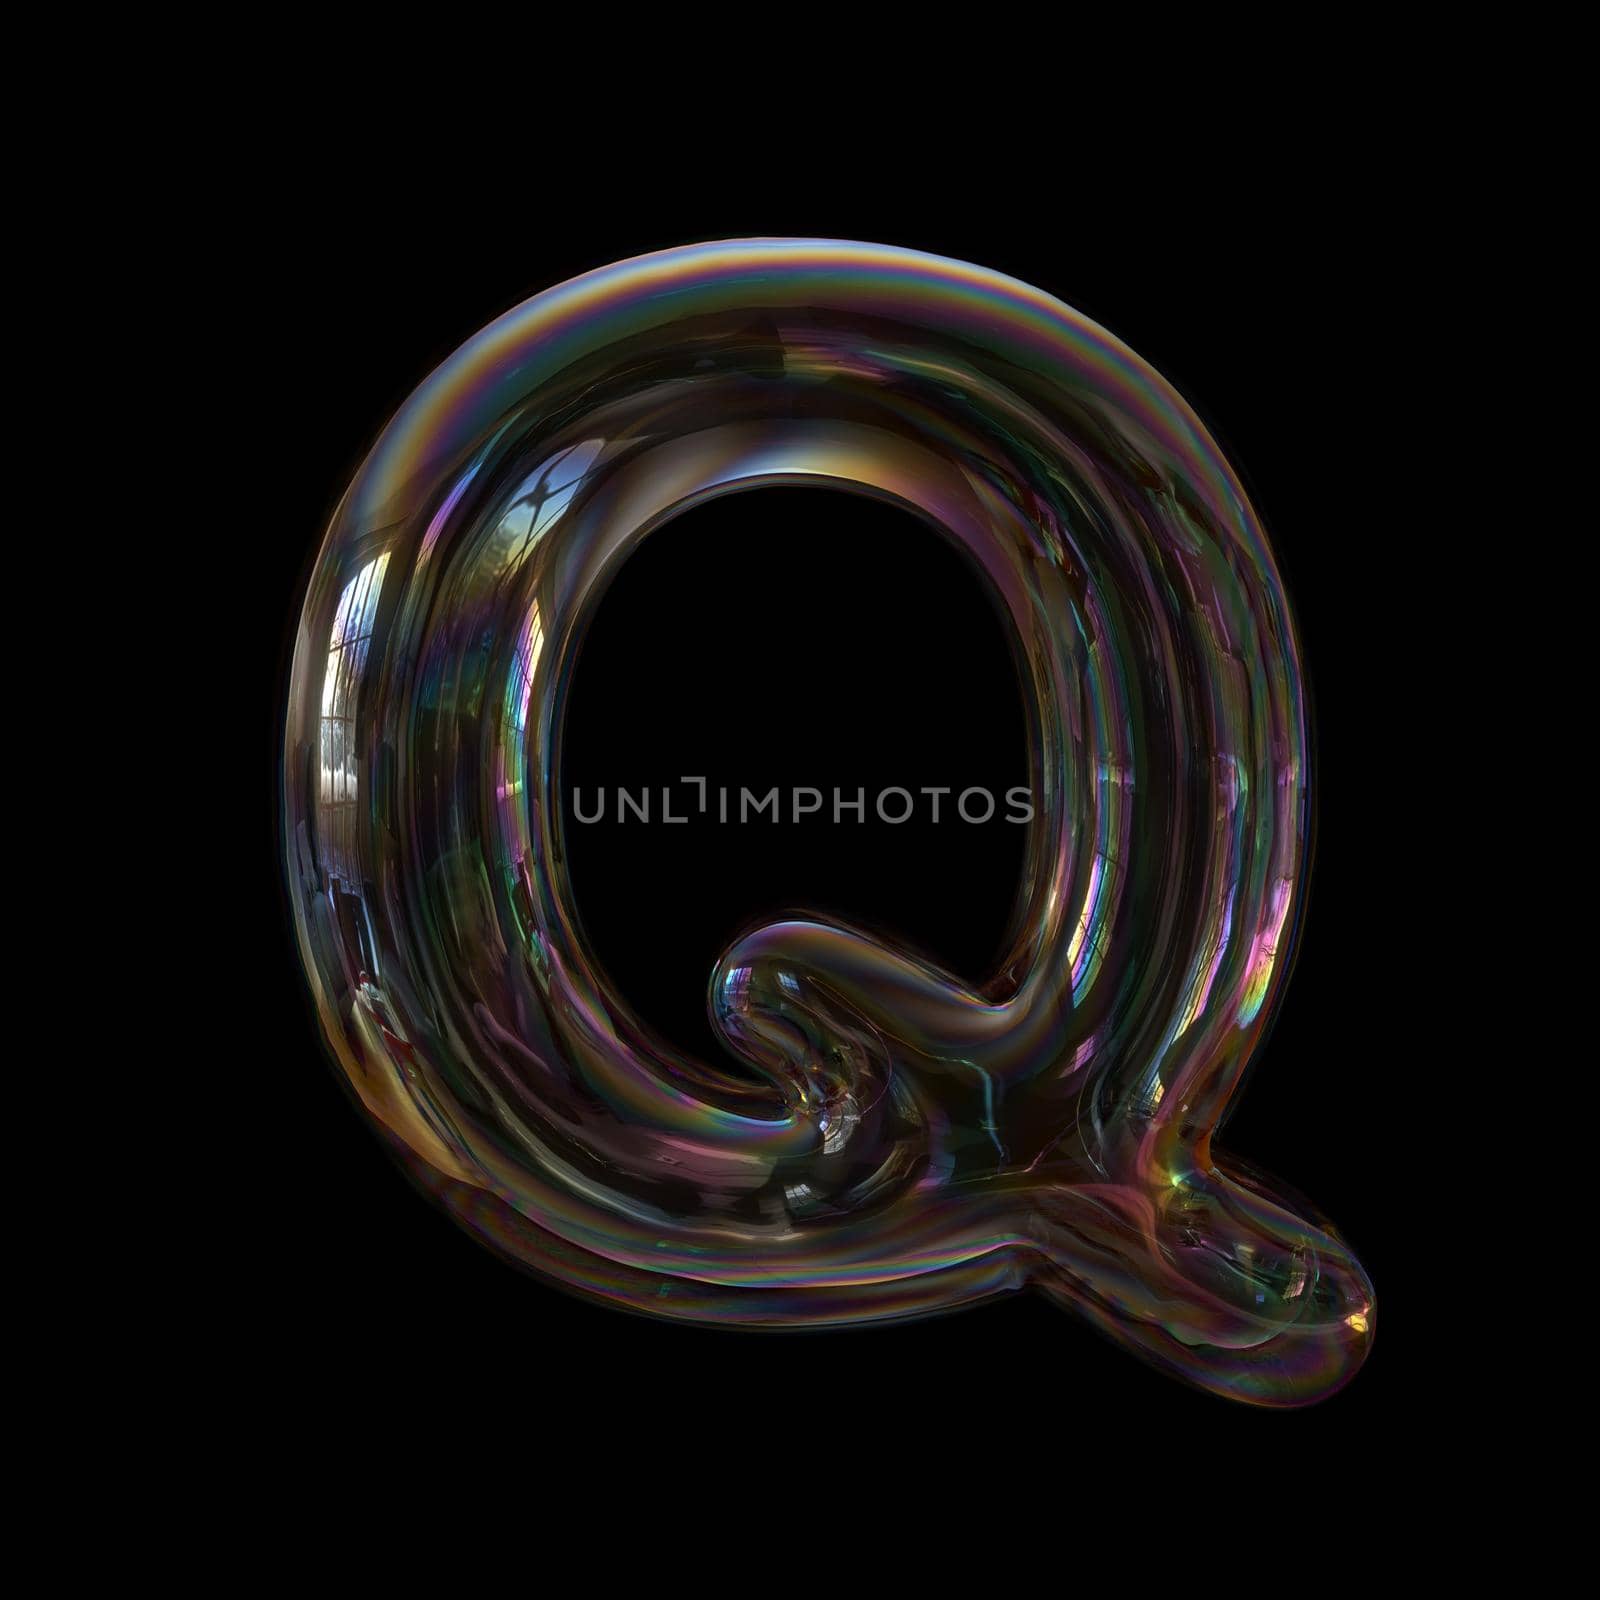 bubble writing alphabet letter Q - Upper-case 3d font isolated on a black background.
This 3d font collection is well-suited for various creative projects including but not limited to : Childhood. events. nature...